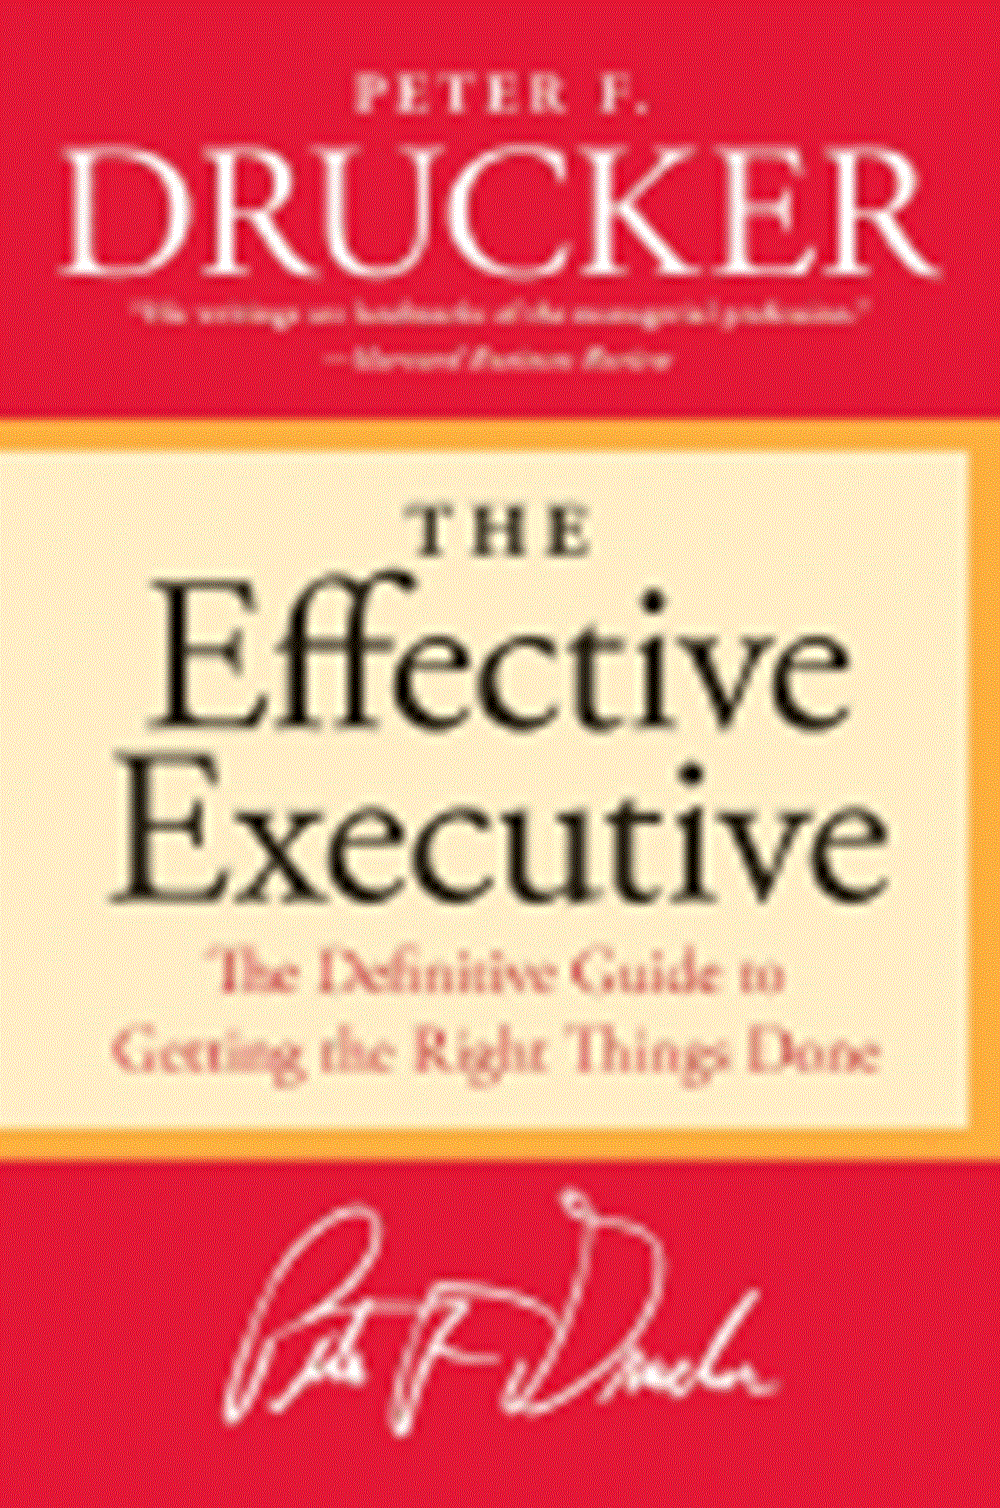 Effective Executive: The Definitive Guide to Getting the Right Things Done